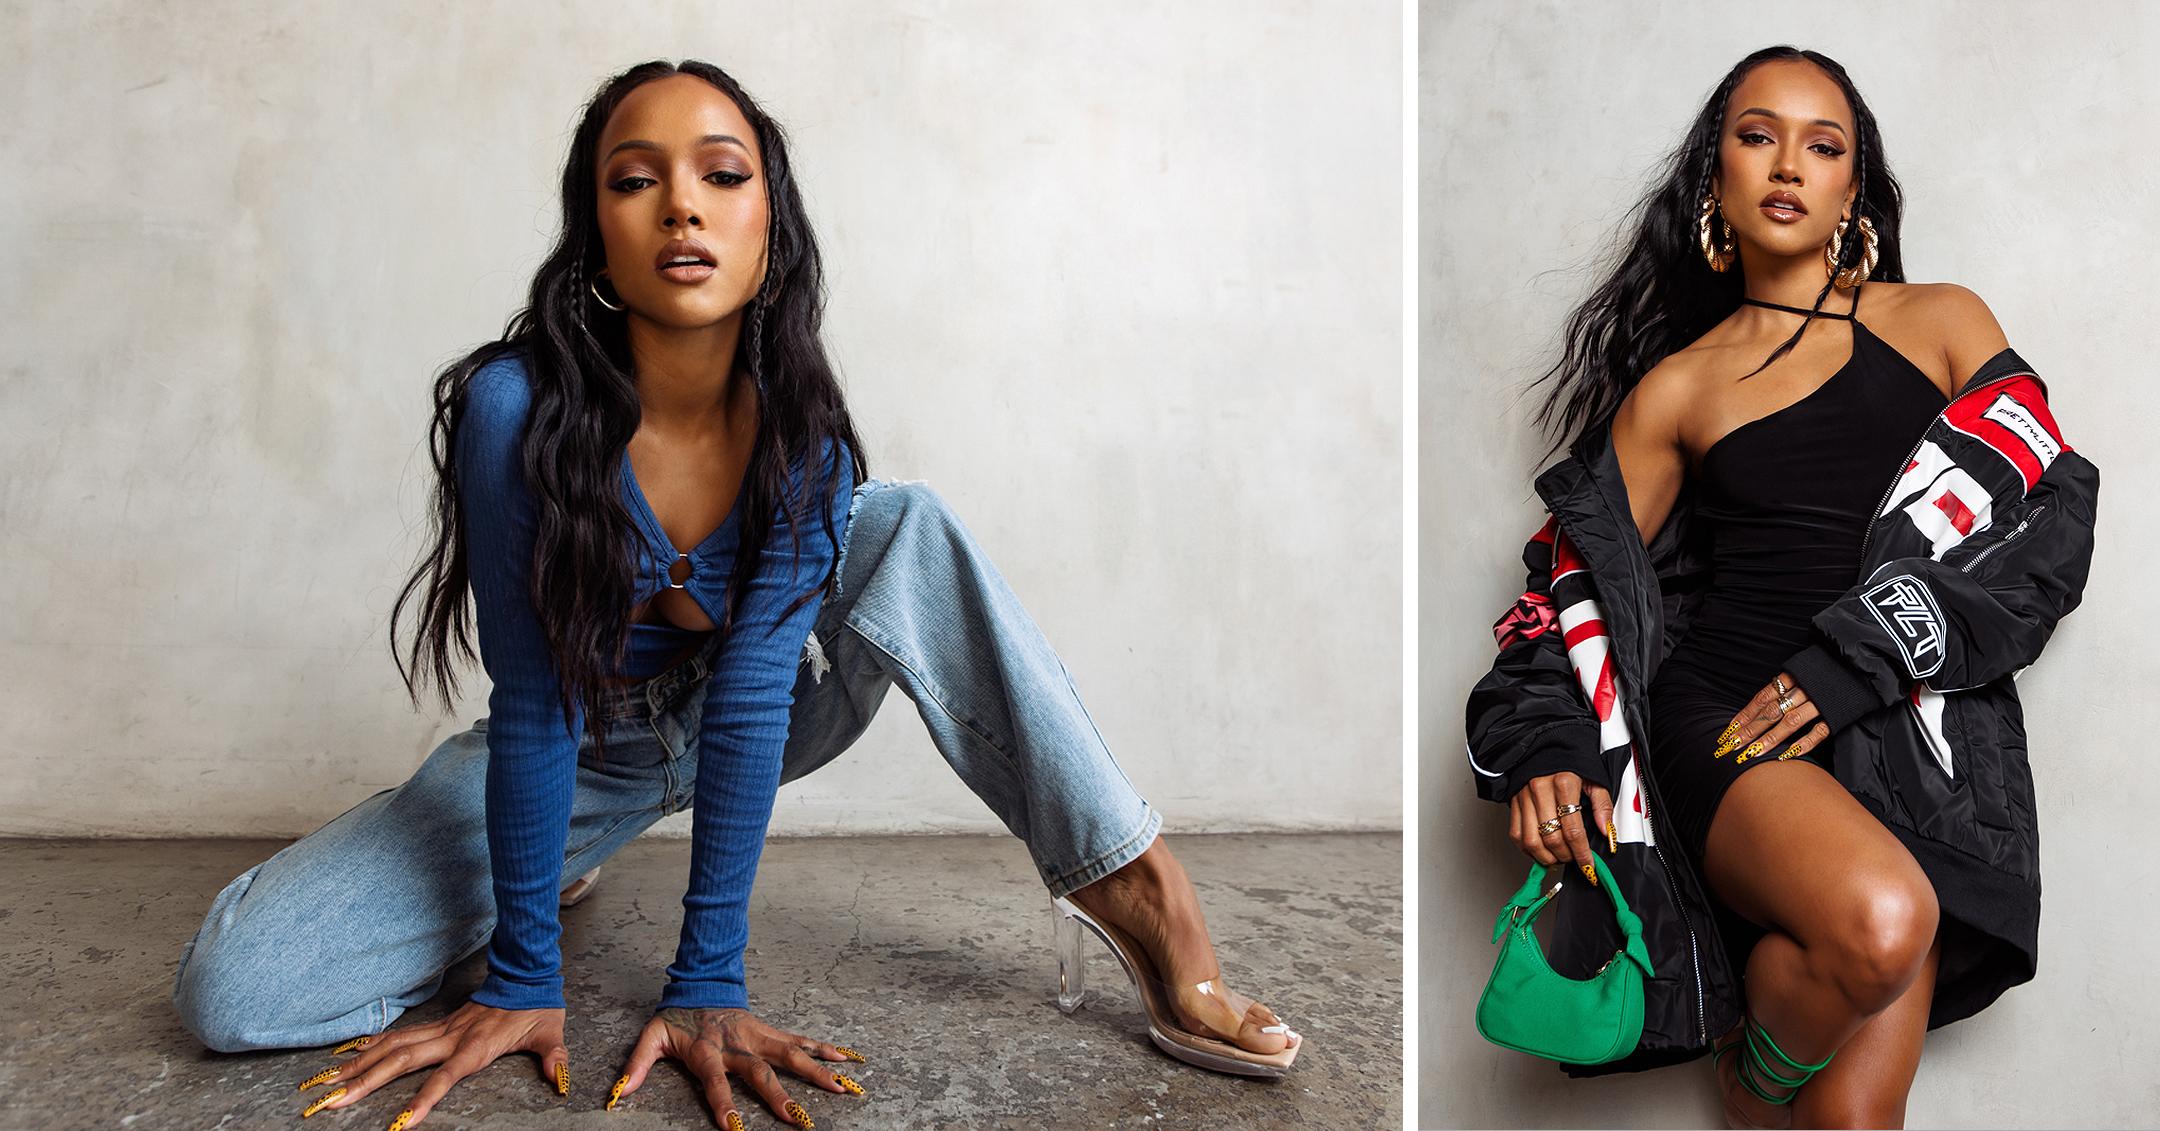 Prettylittlething And Karrueche Tran Drop New Clothing Collection Photos